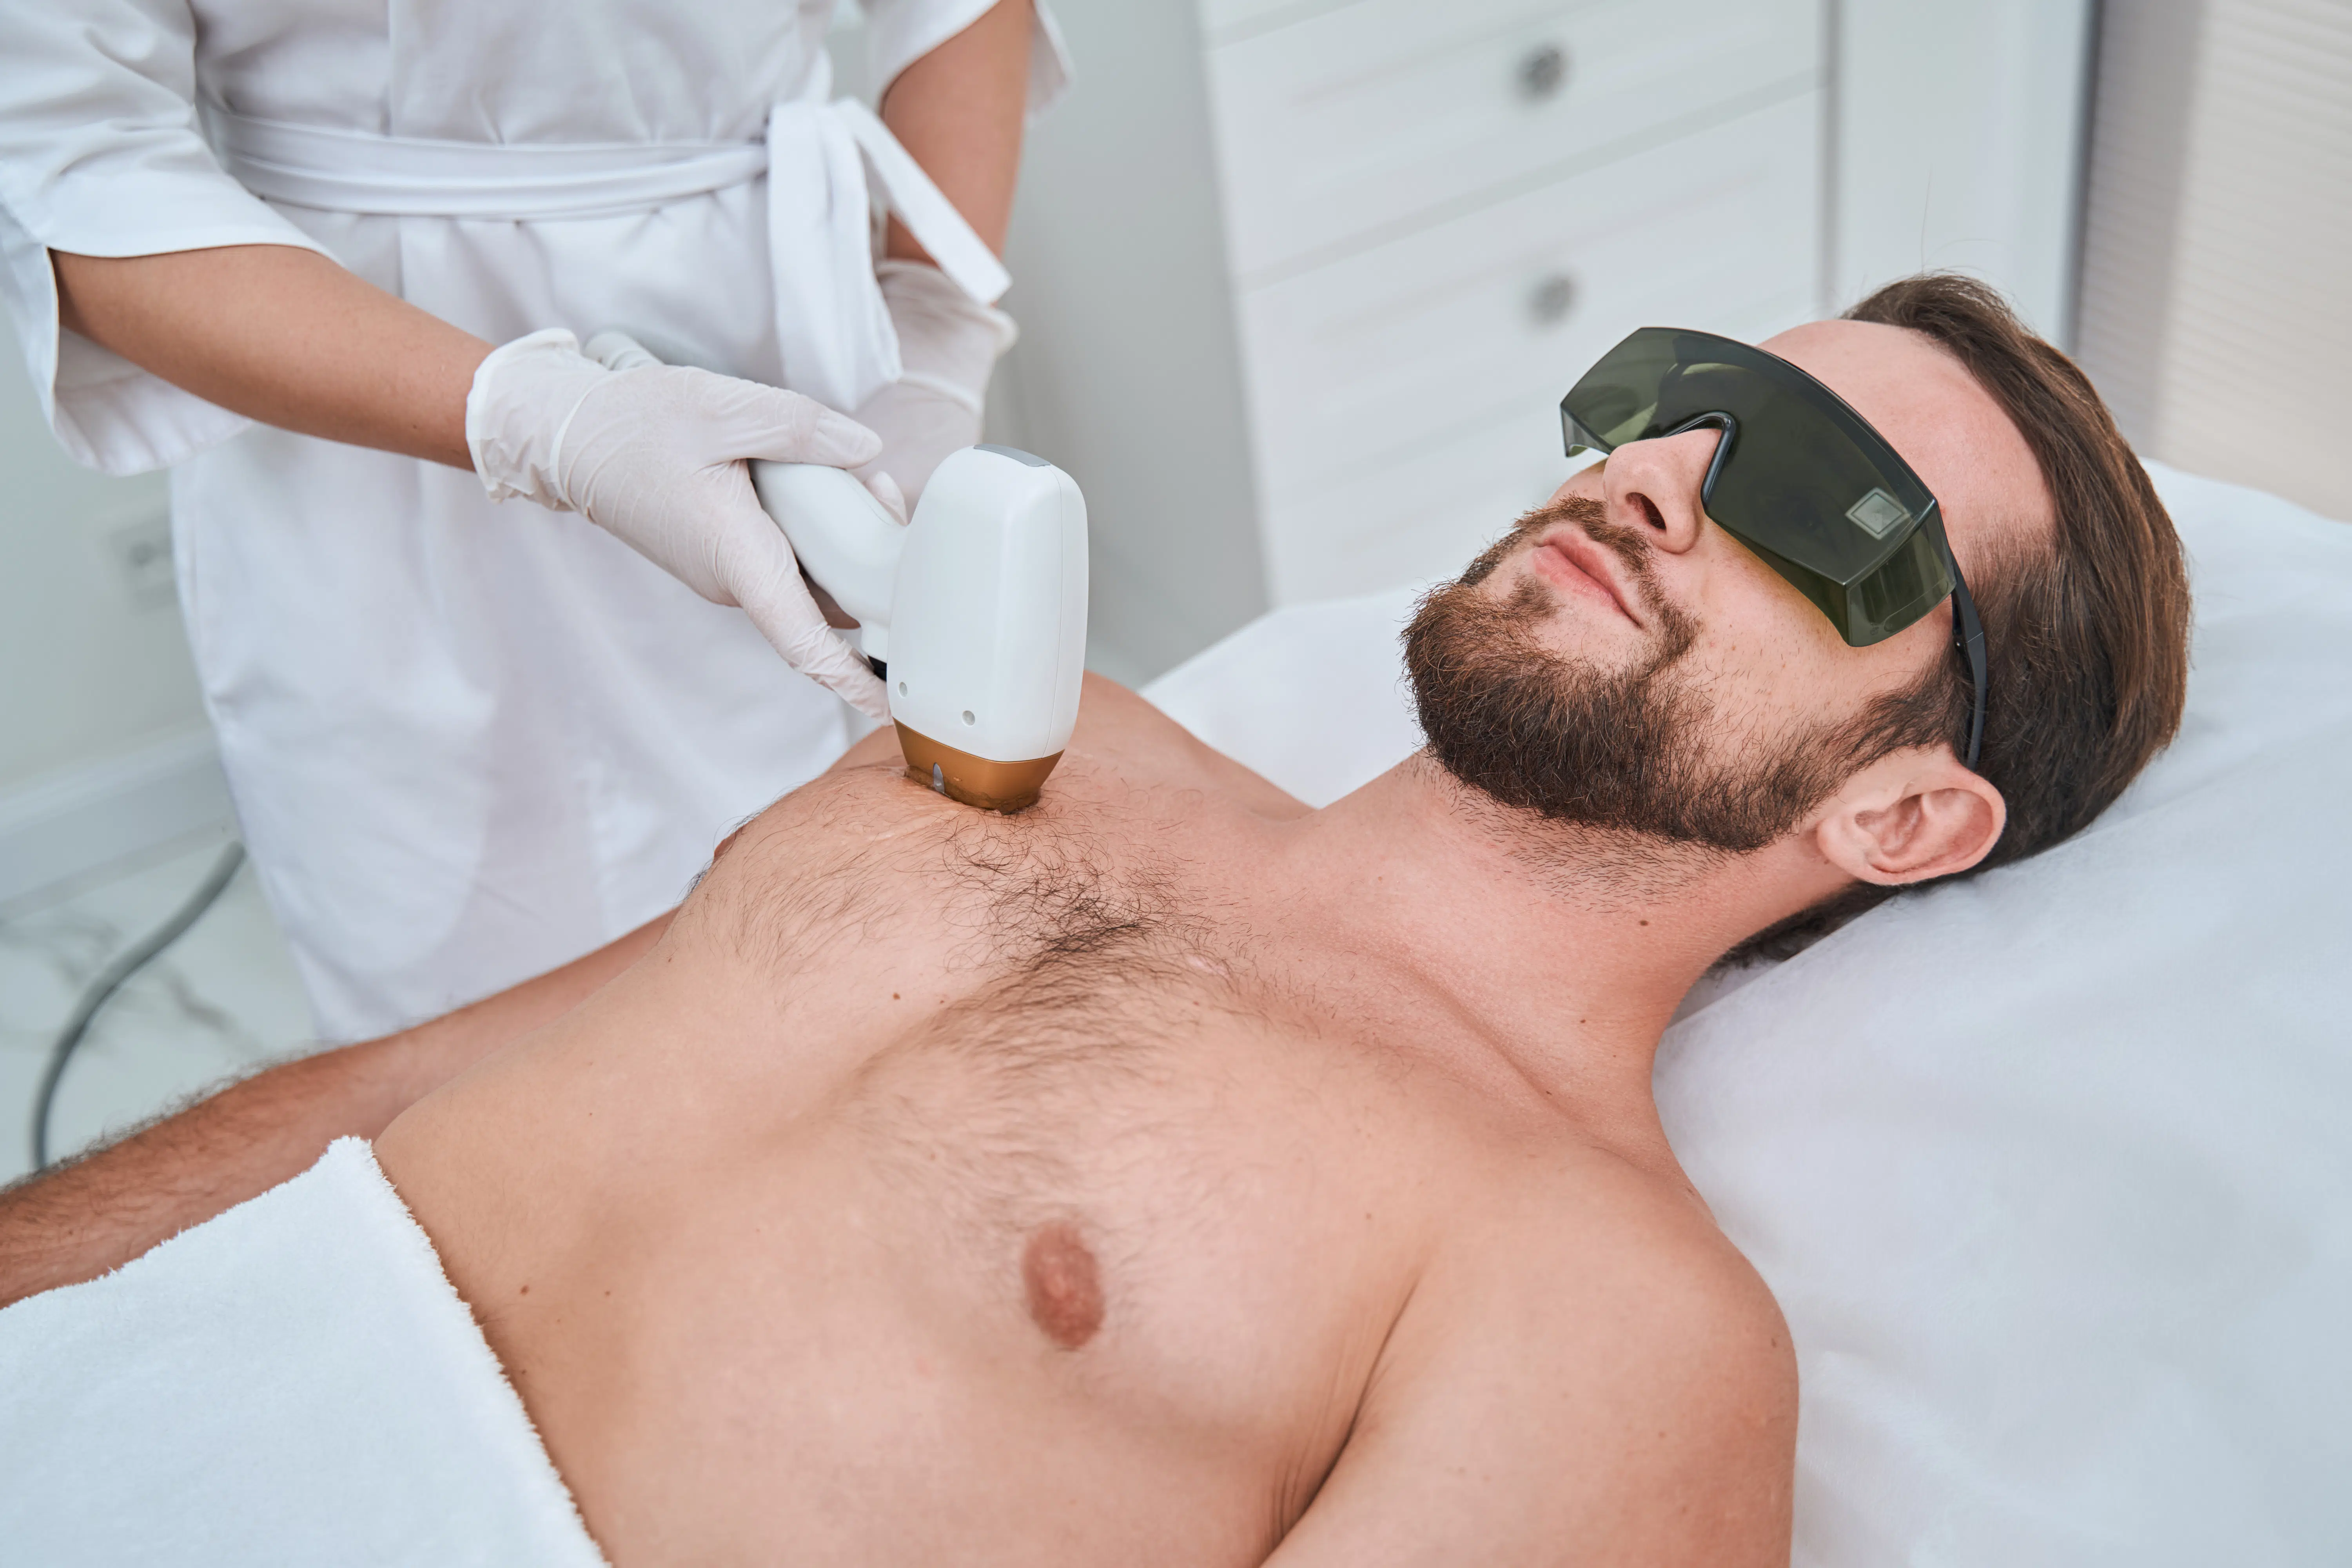 Spa client undergoing a medical procedure performed by a dermatologist